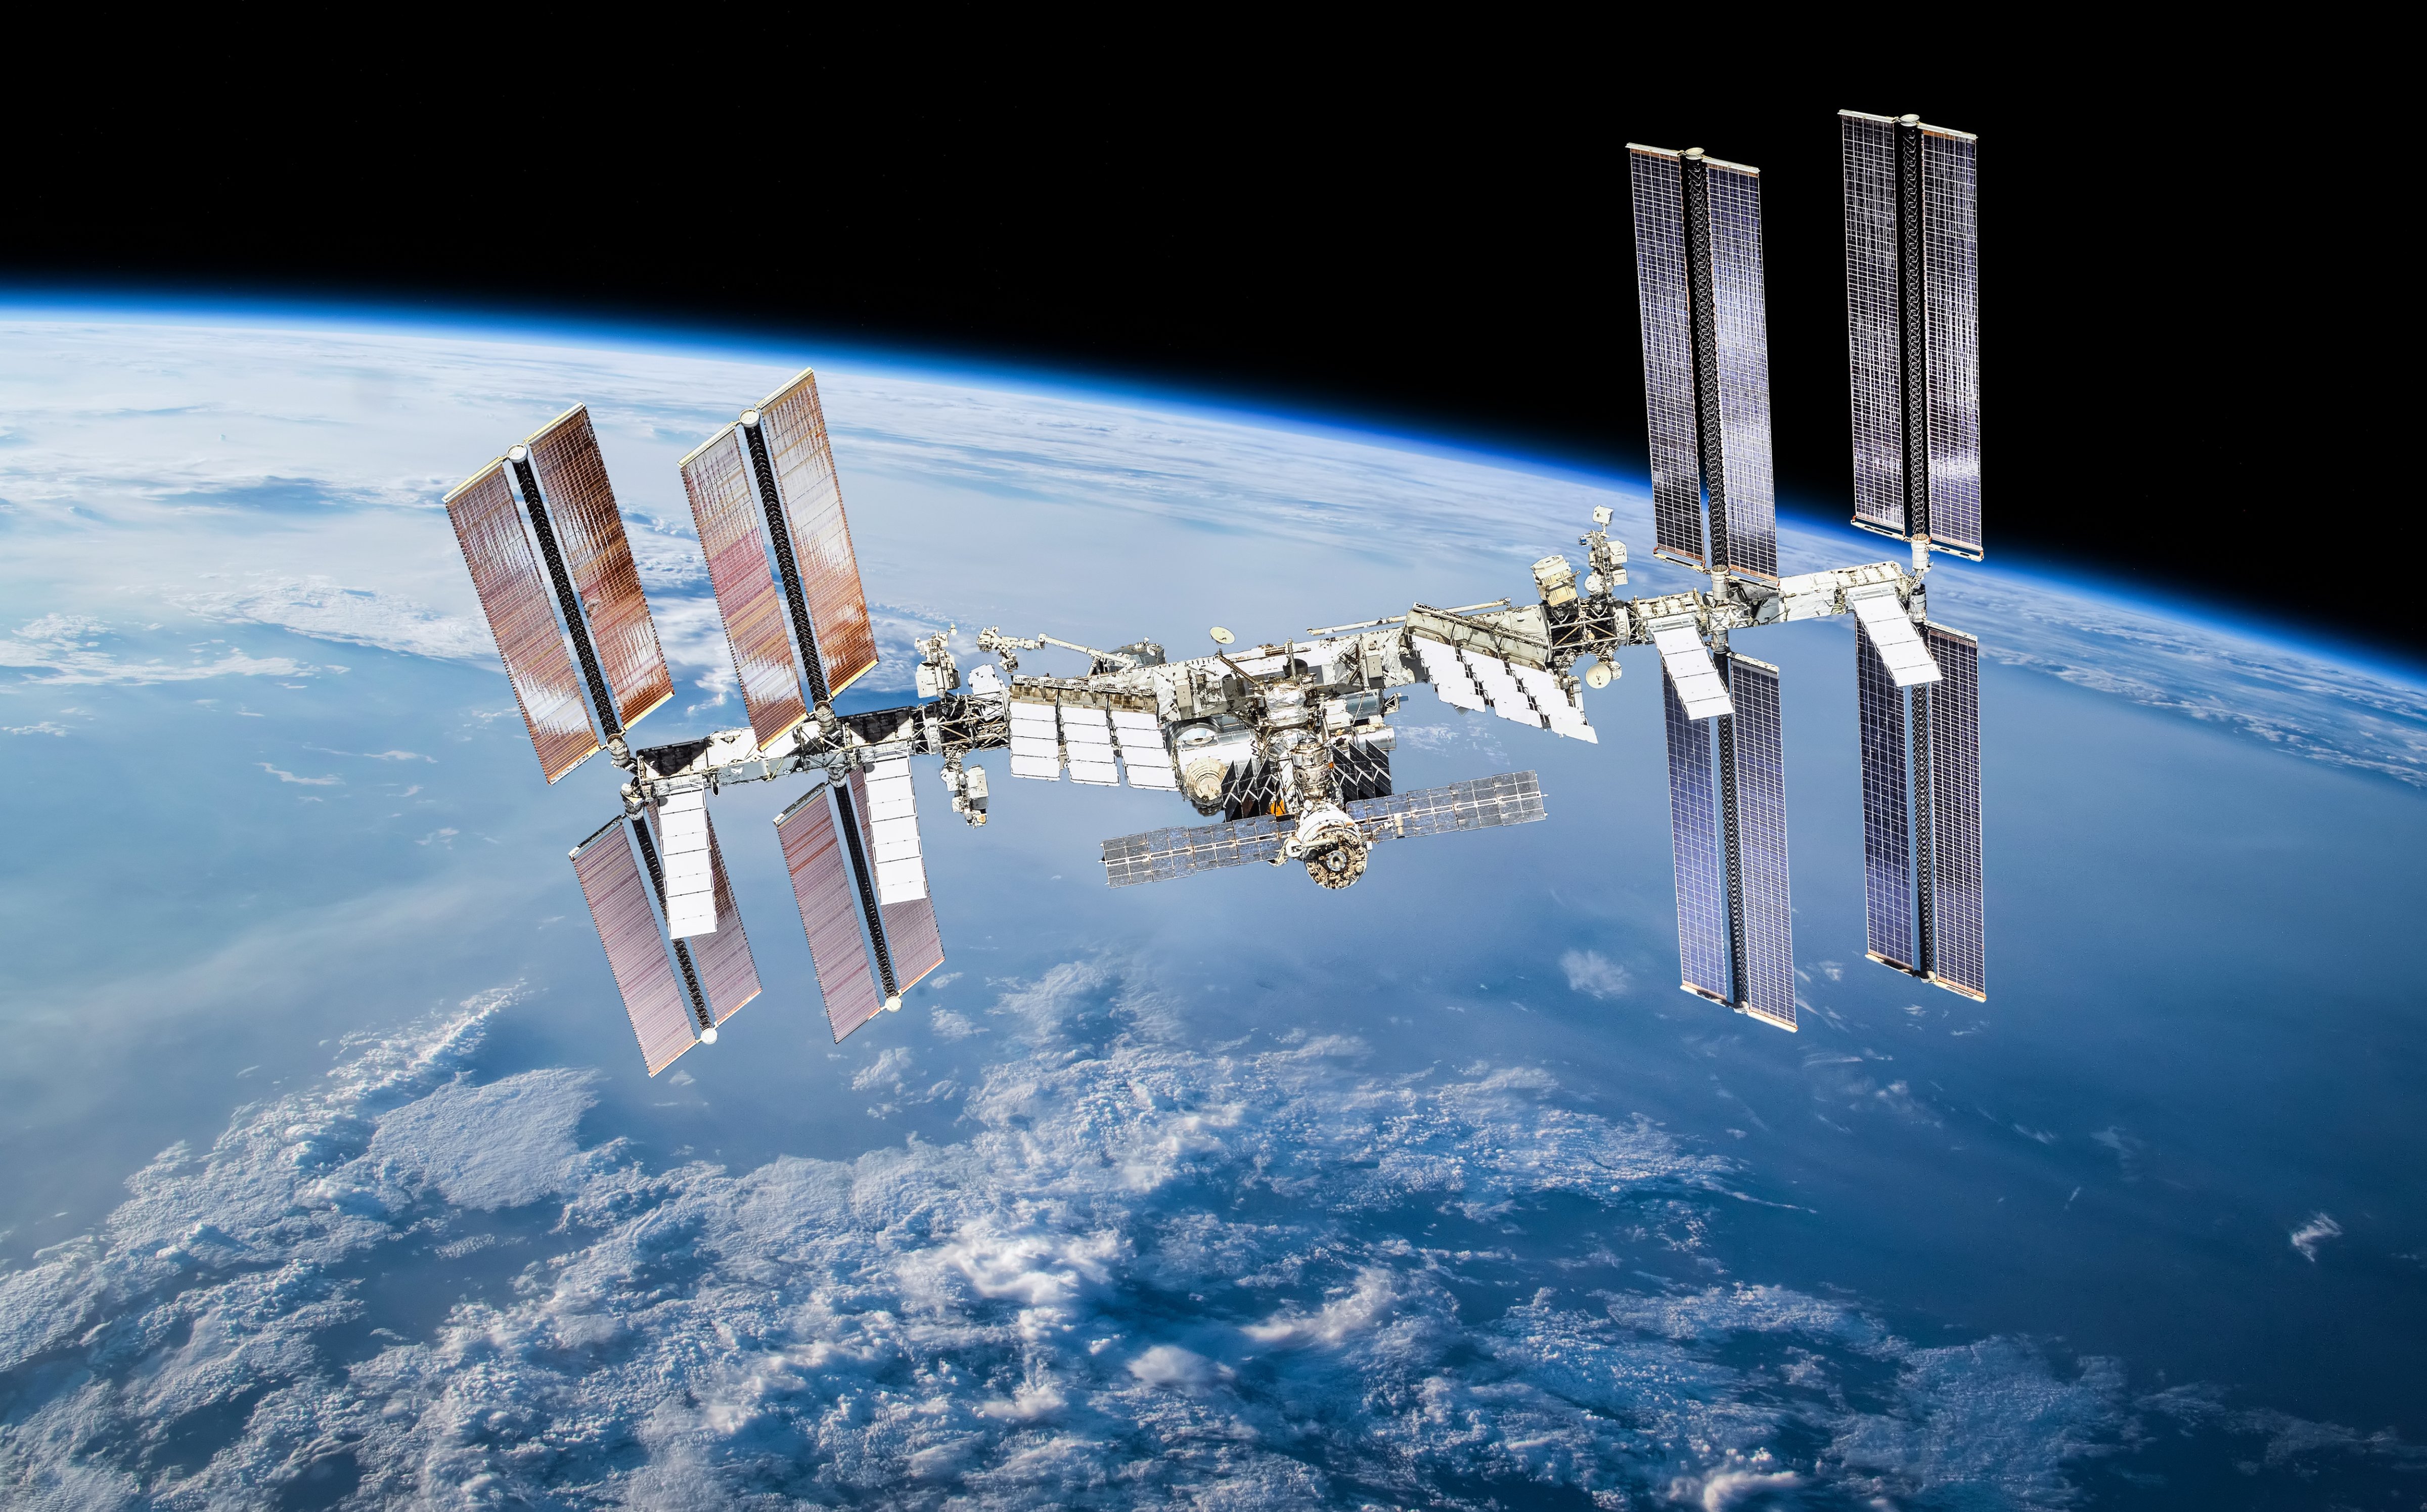 ISS station on orbit of the Earth planet. Elements of this image furnished by NASA